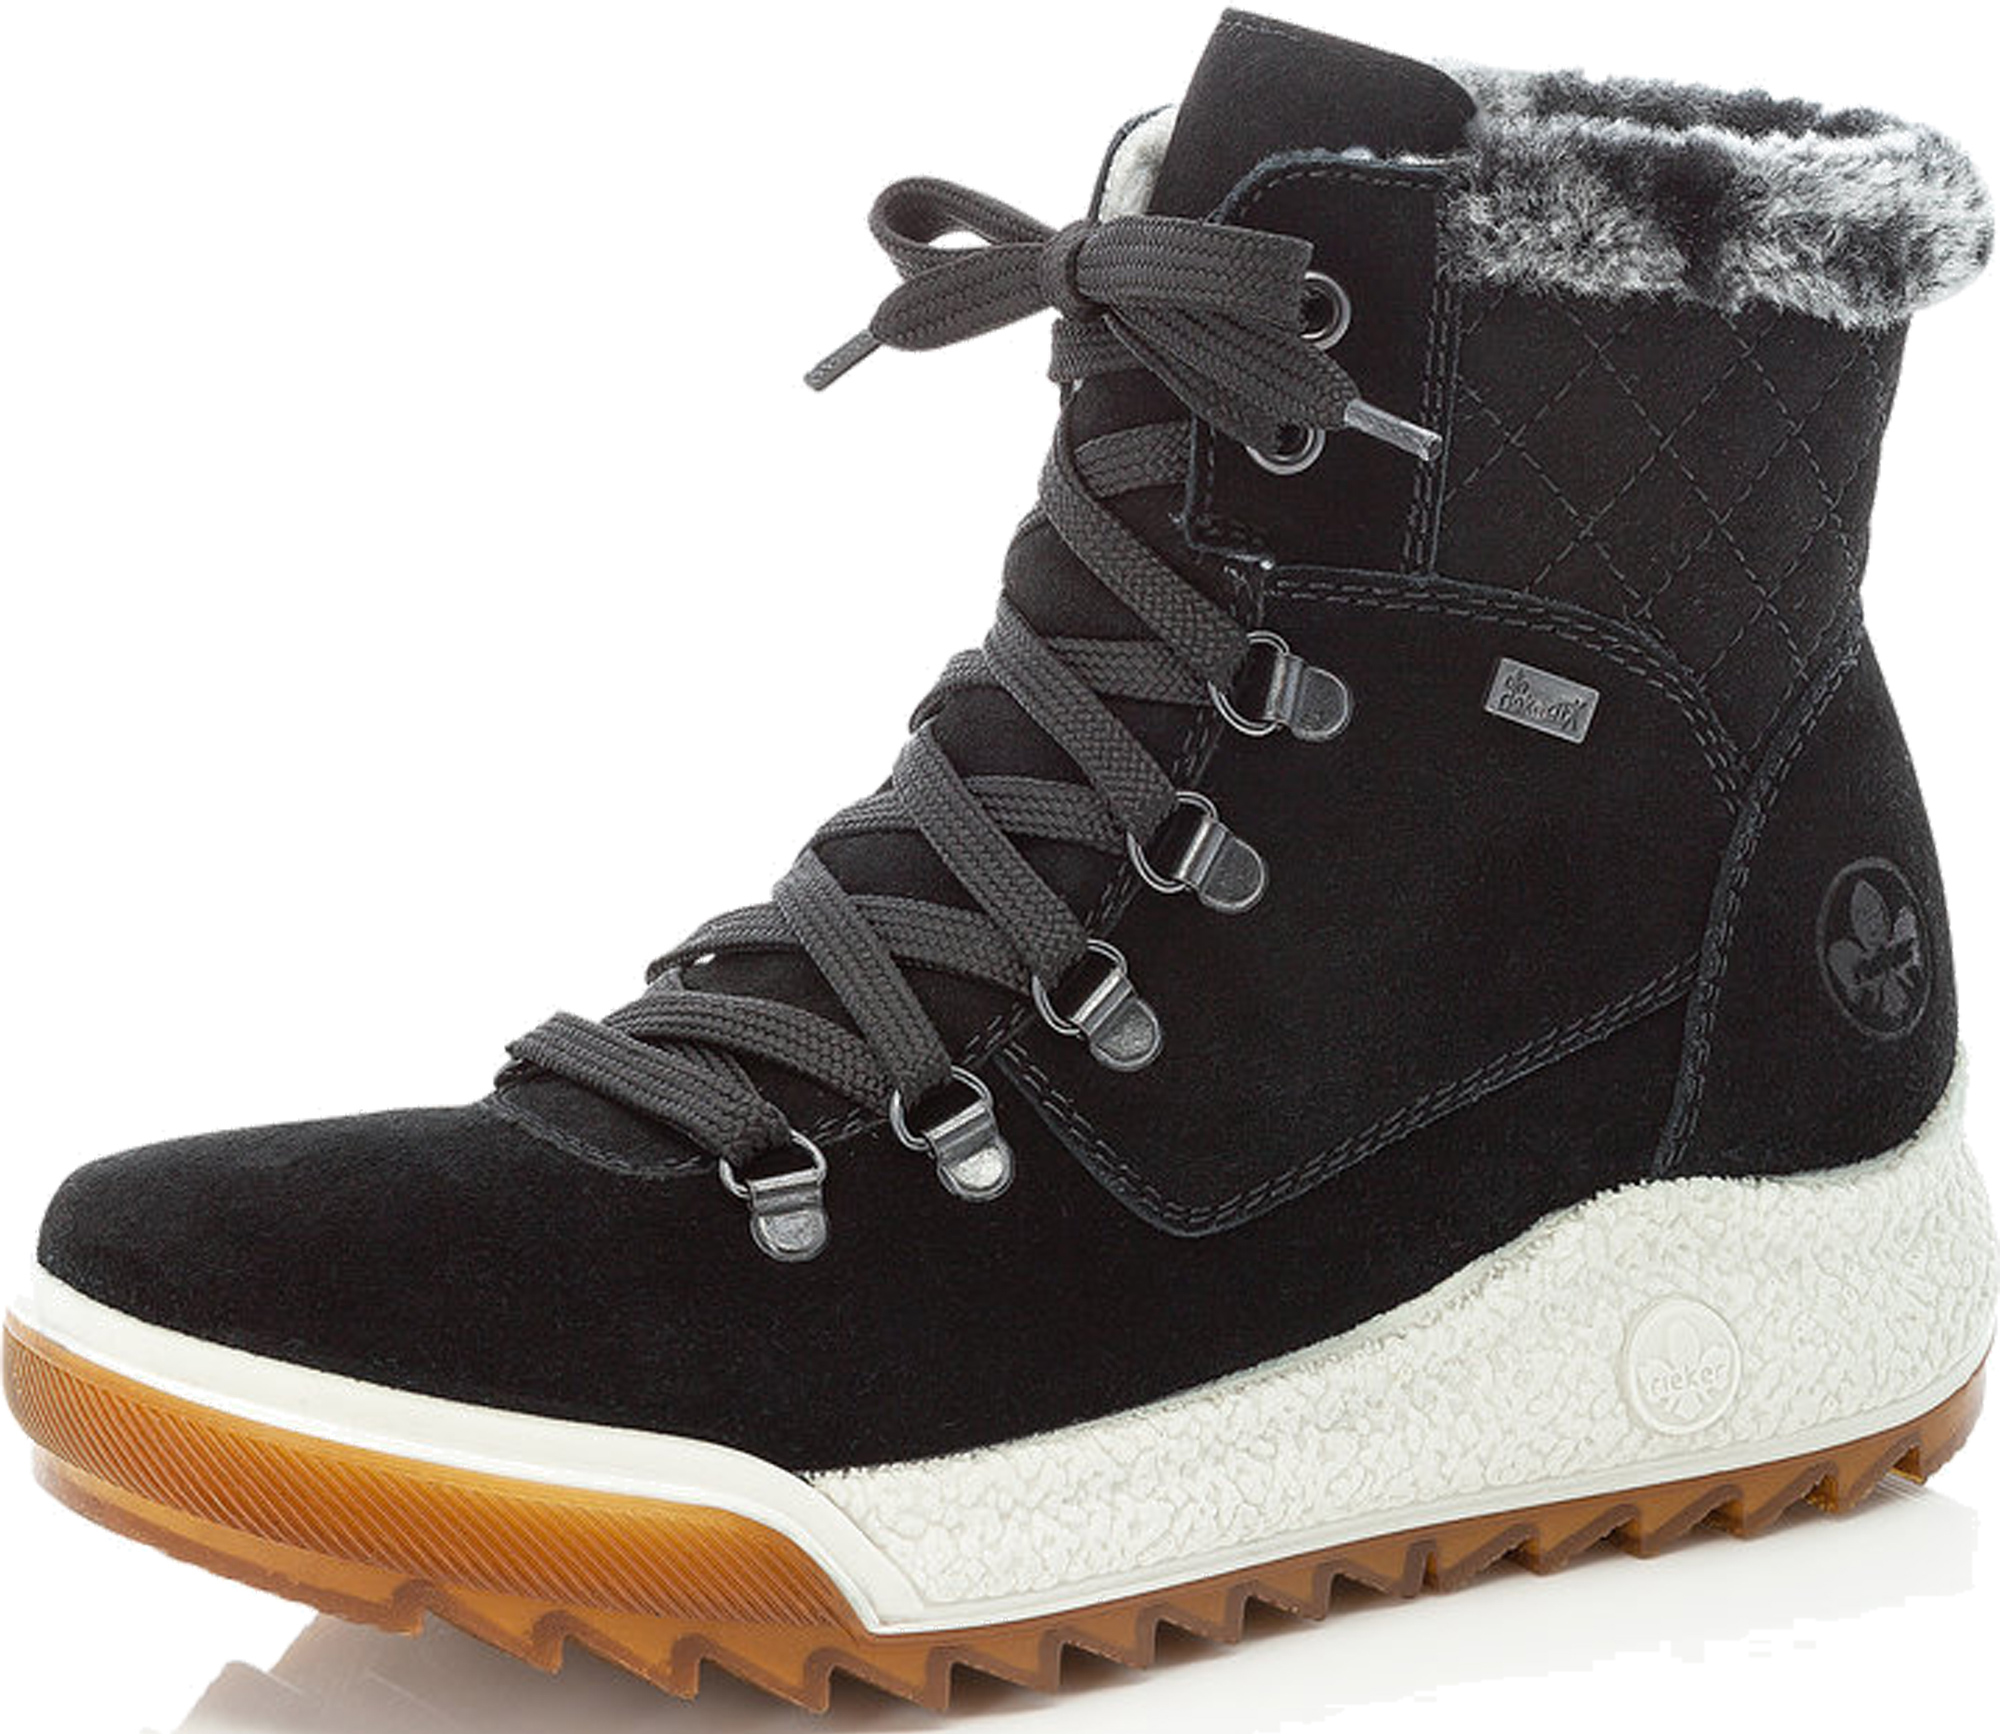 Rieker Black Saw Tooth Sole D Ring Suede Hiker size 6 7